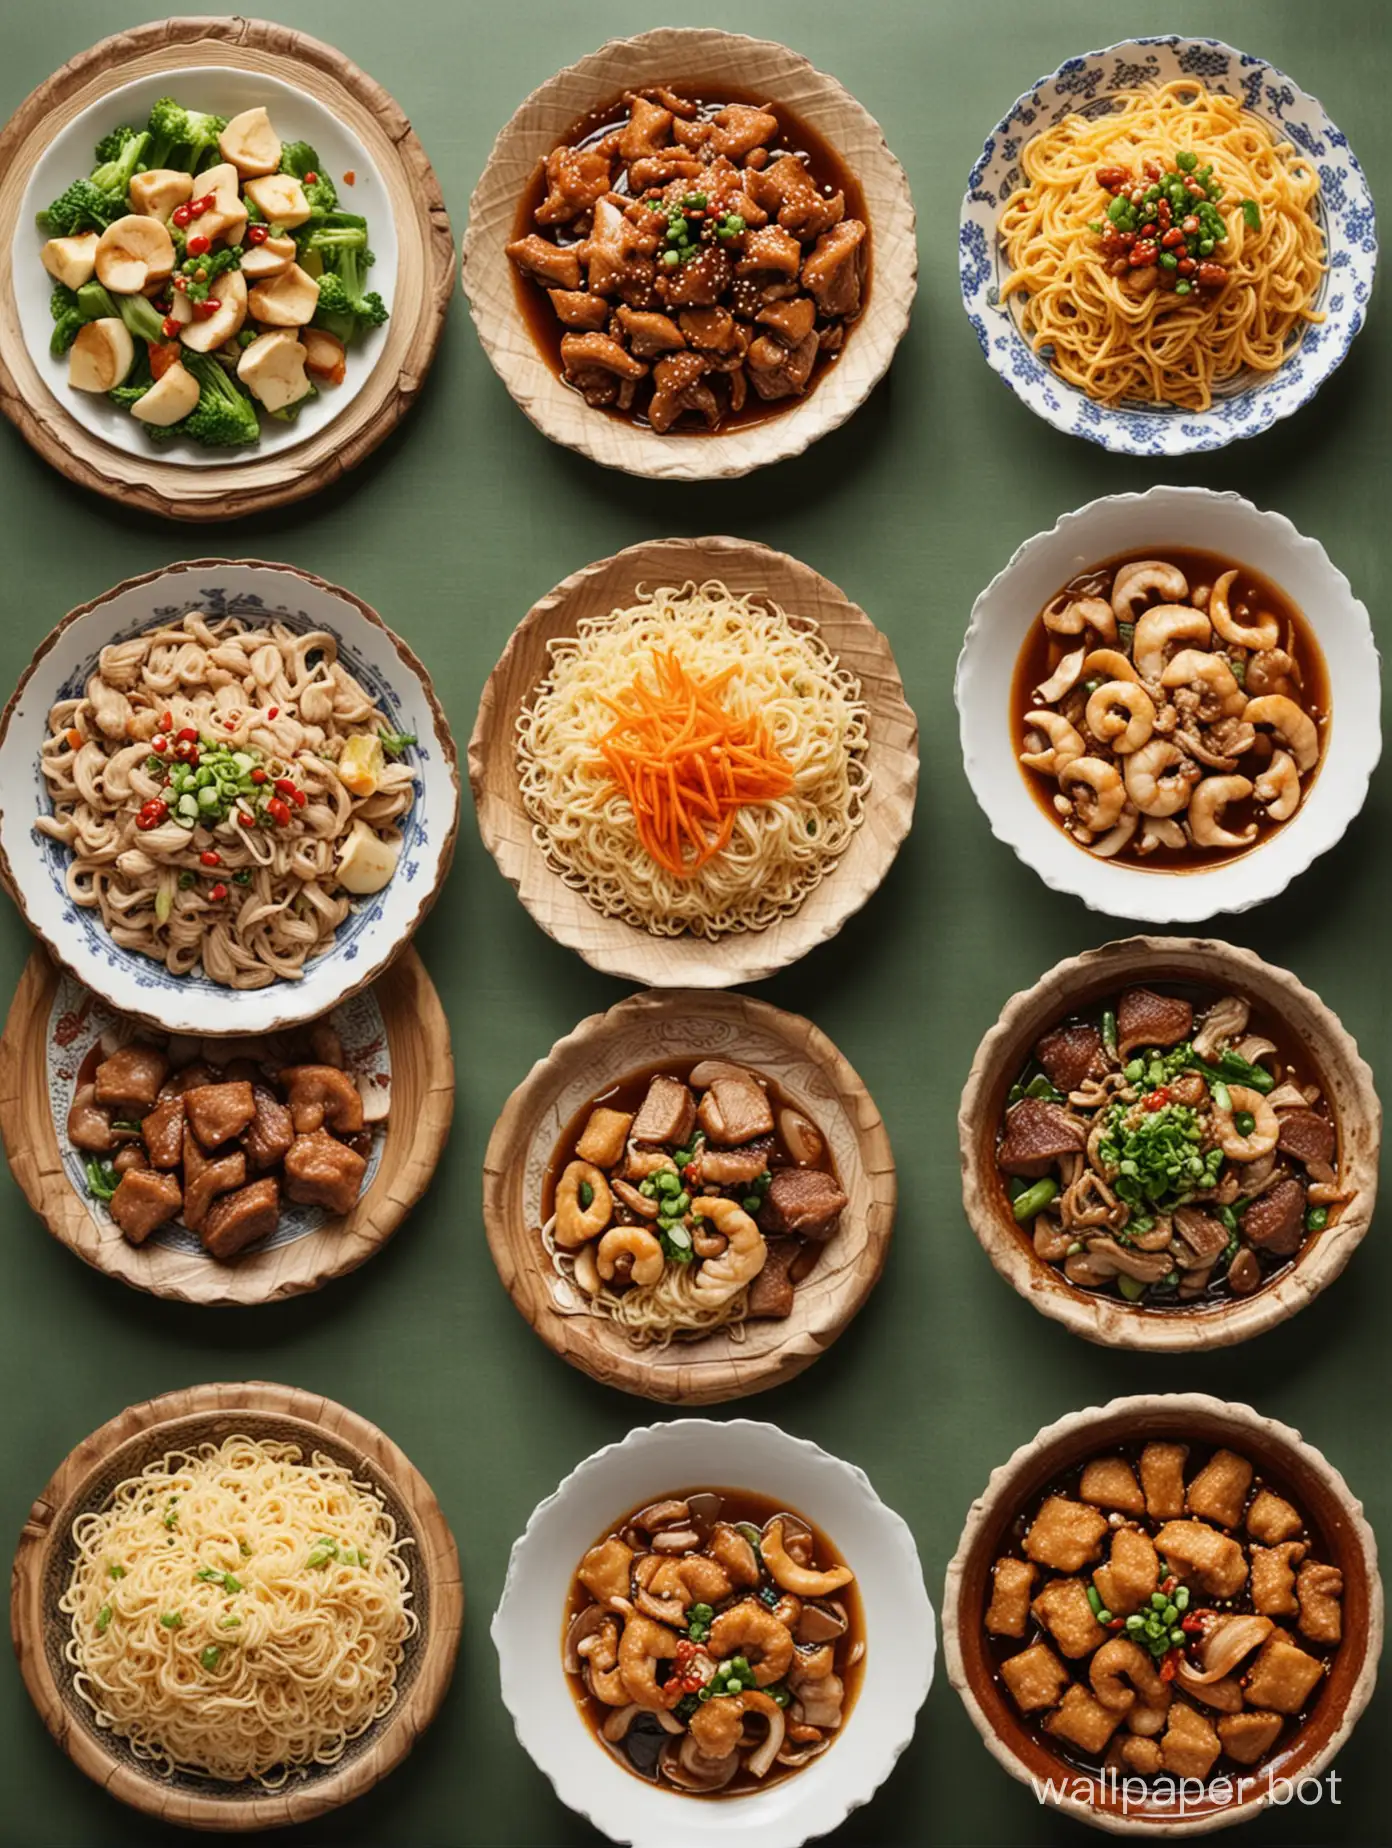 Delicious-Representation-of-the-Eight-Major-Chinese-Cuisines